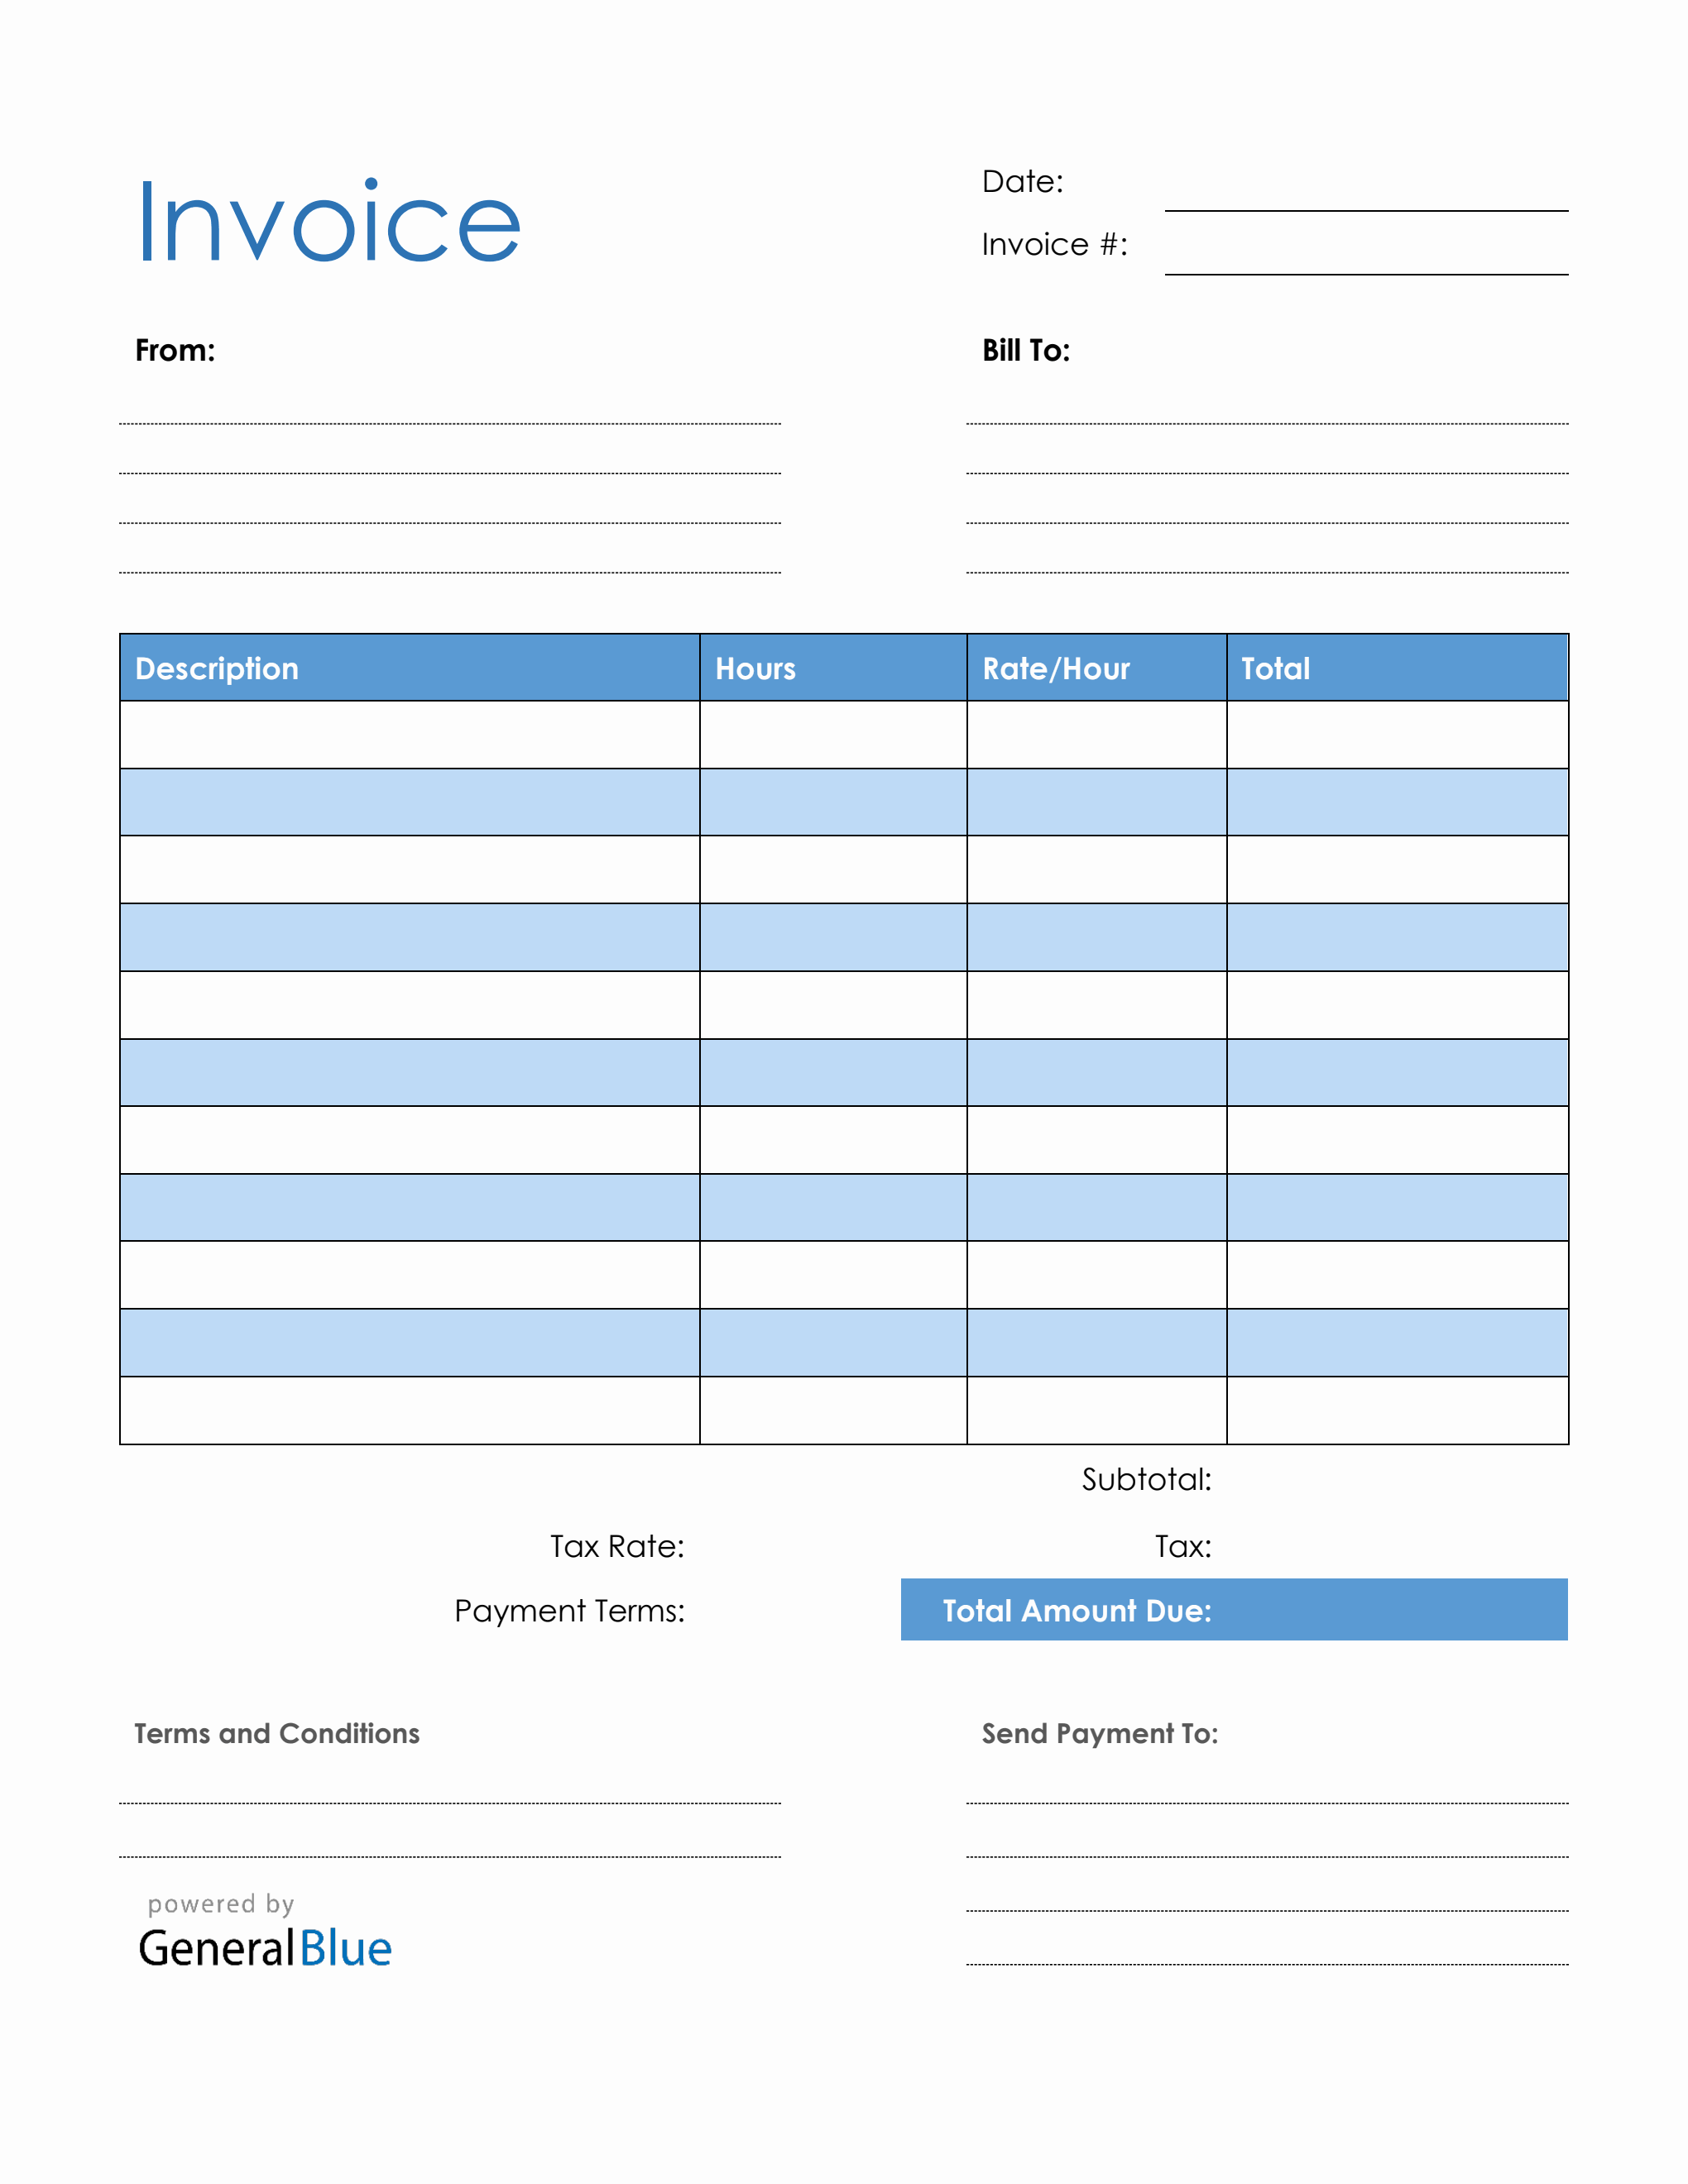 blank-invoice-template-in-pdf-blue-riset